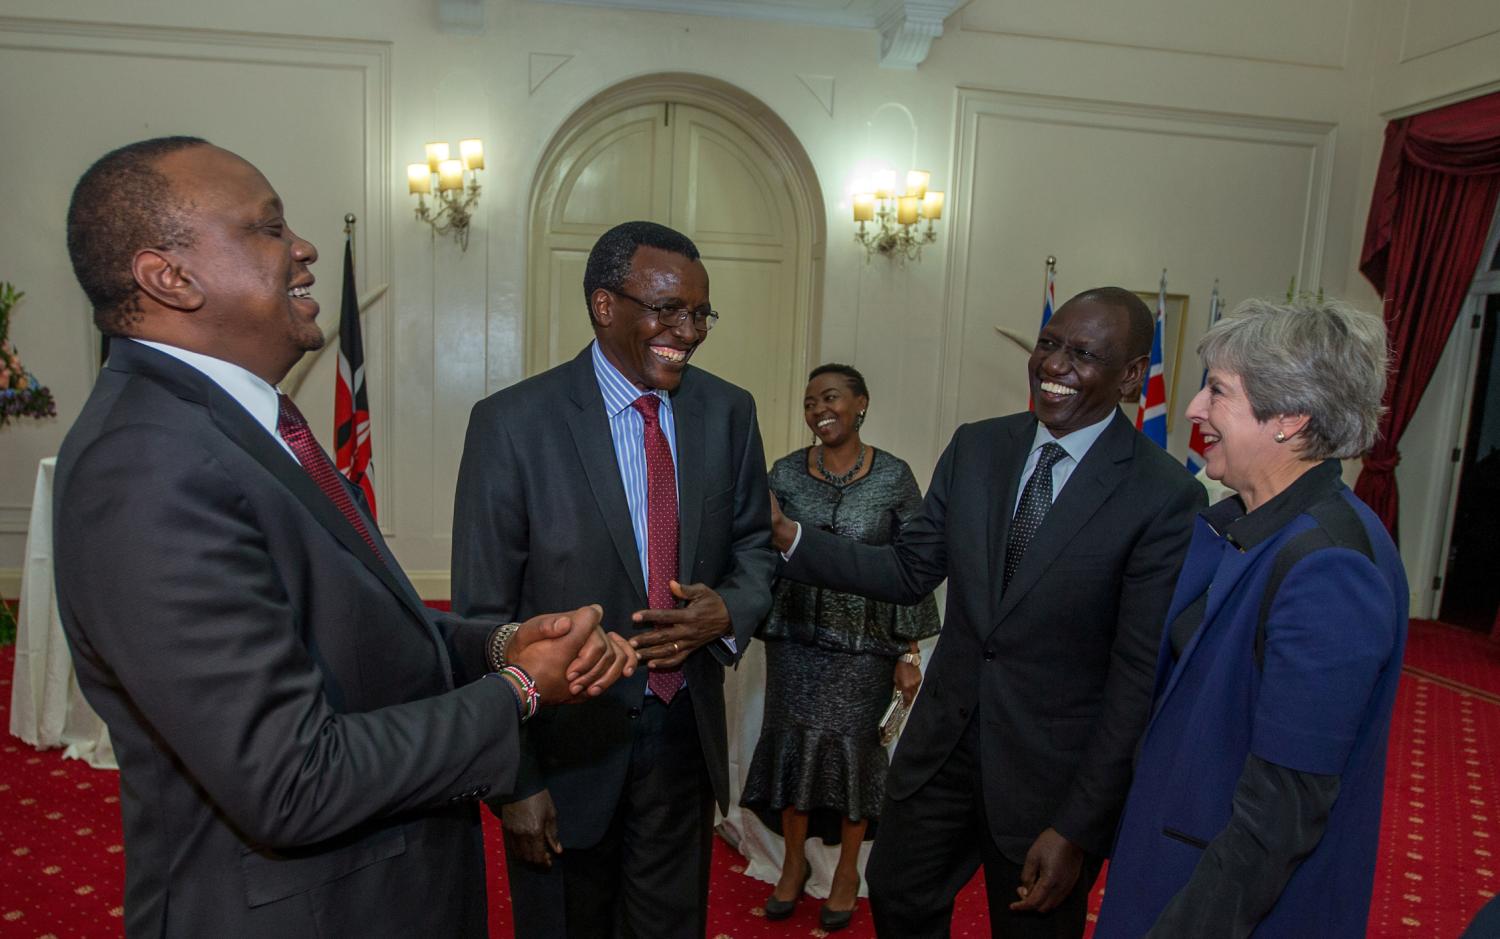 Britain's Prime Minister Theresa May talks to Kenya's President Uhuru Kenyatta, Deputy President William Ruto and Chief Justice David Maraga, during a State Banquet at State House in Nairobi, Kenya August 30, 2018. Picture taken August 30, 2018. Kenya Presidential Press Service/Handout via REUTERS ATTENTION EDITORS - THIS IMAGE WAS PROVIDED BY A THIRD PARTY. - RC1C7C3DEAA0